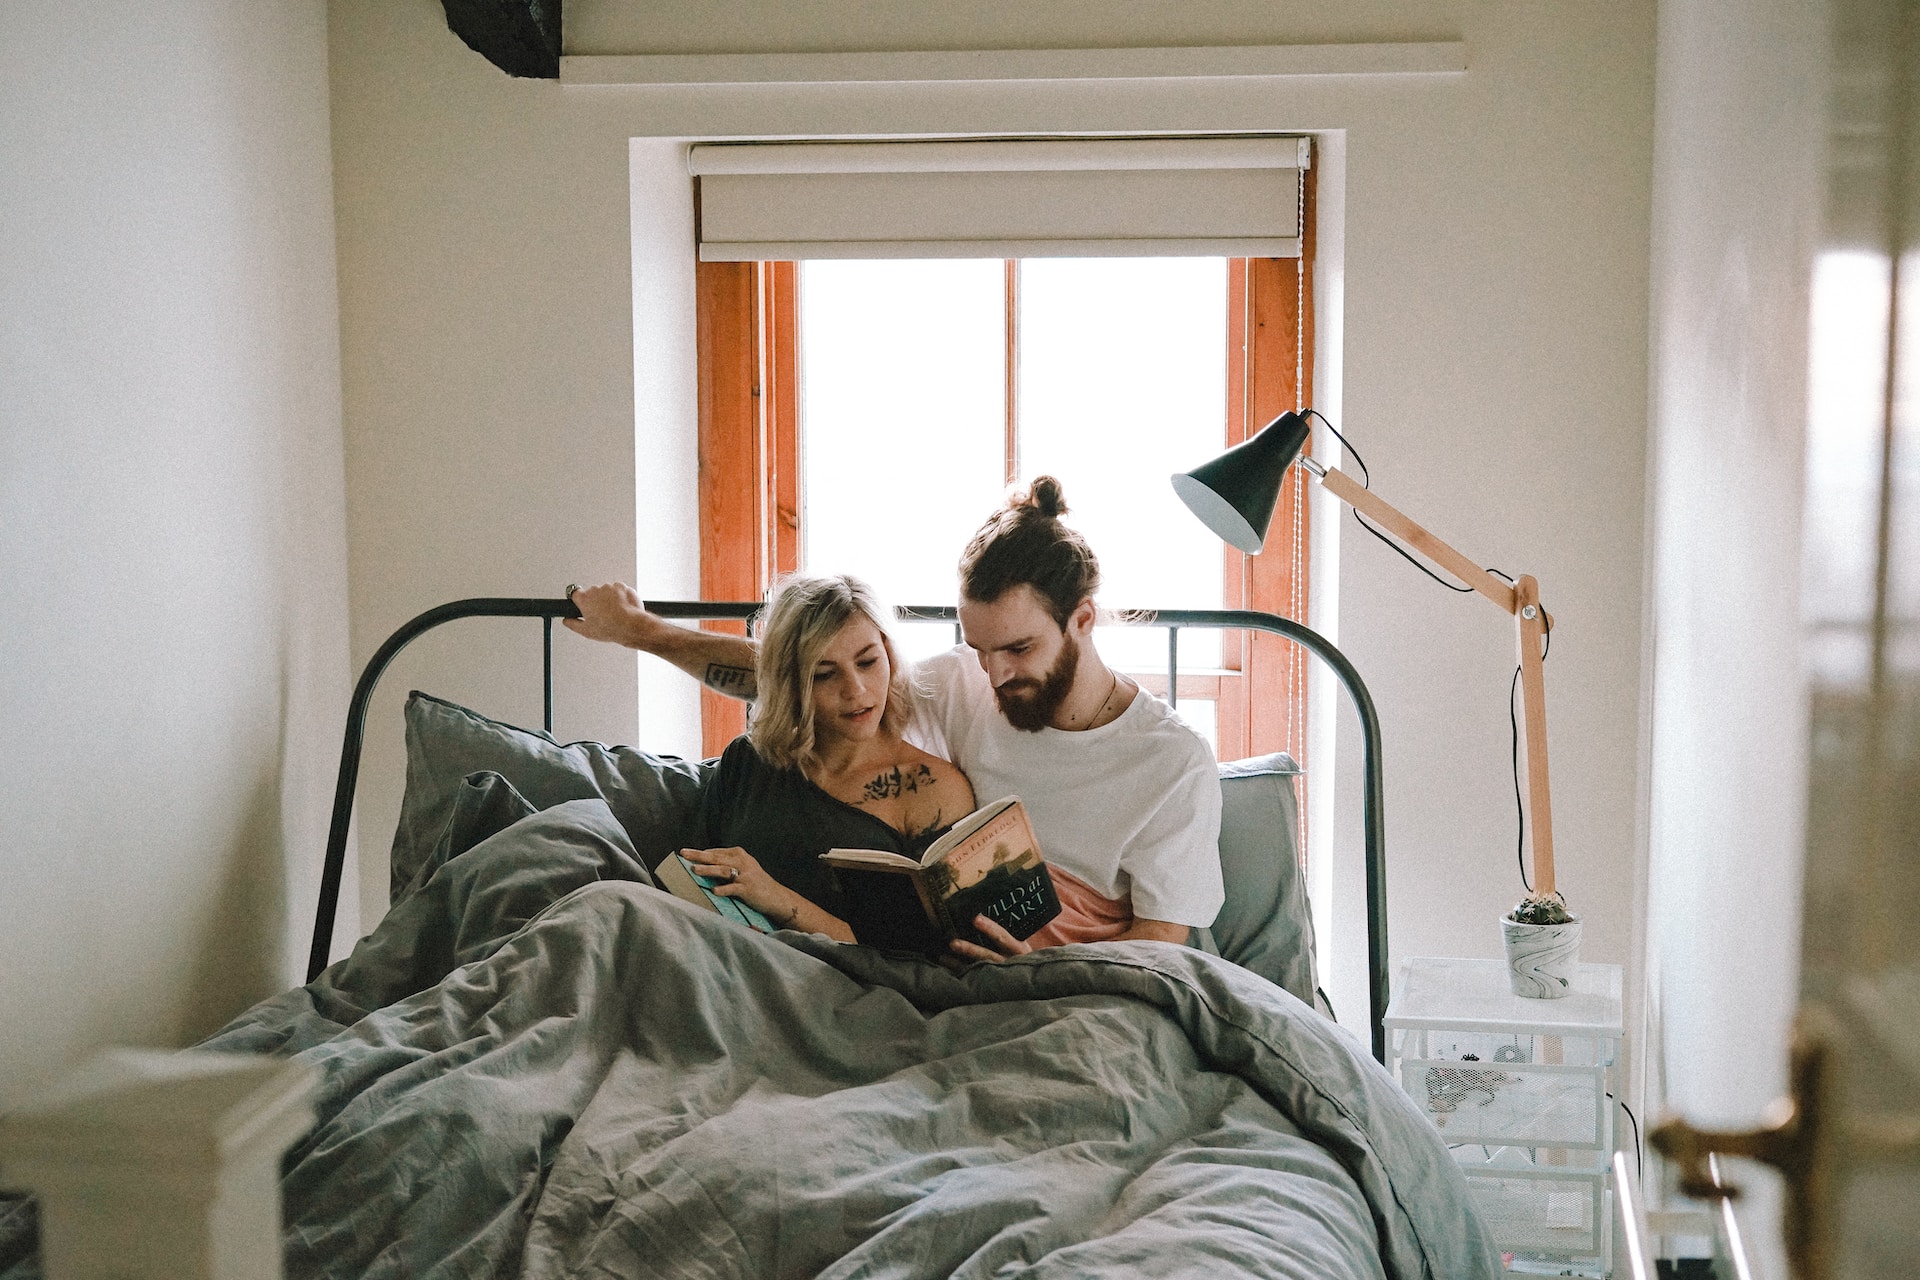 Couple, Love Images, Home, Lover, Boyf, Partner, Relationship, United Kingdom, Sweetheart, Boyfriend and Girlfriend, Bed, Reading in Bed, Reading, Bedroom, Man, Sheets, Décor, Furniture